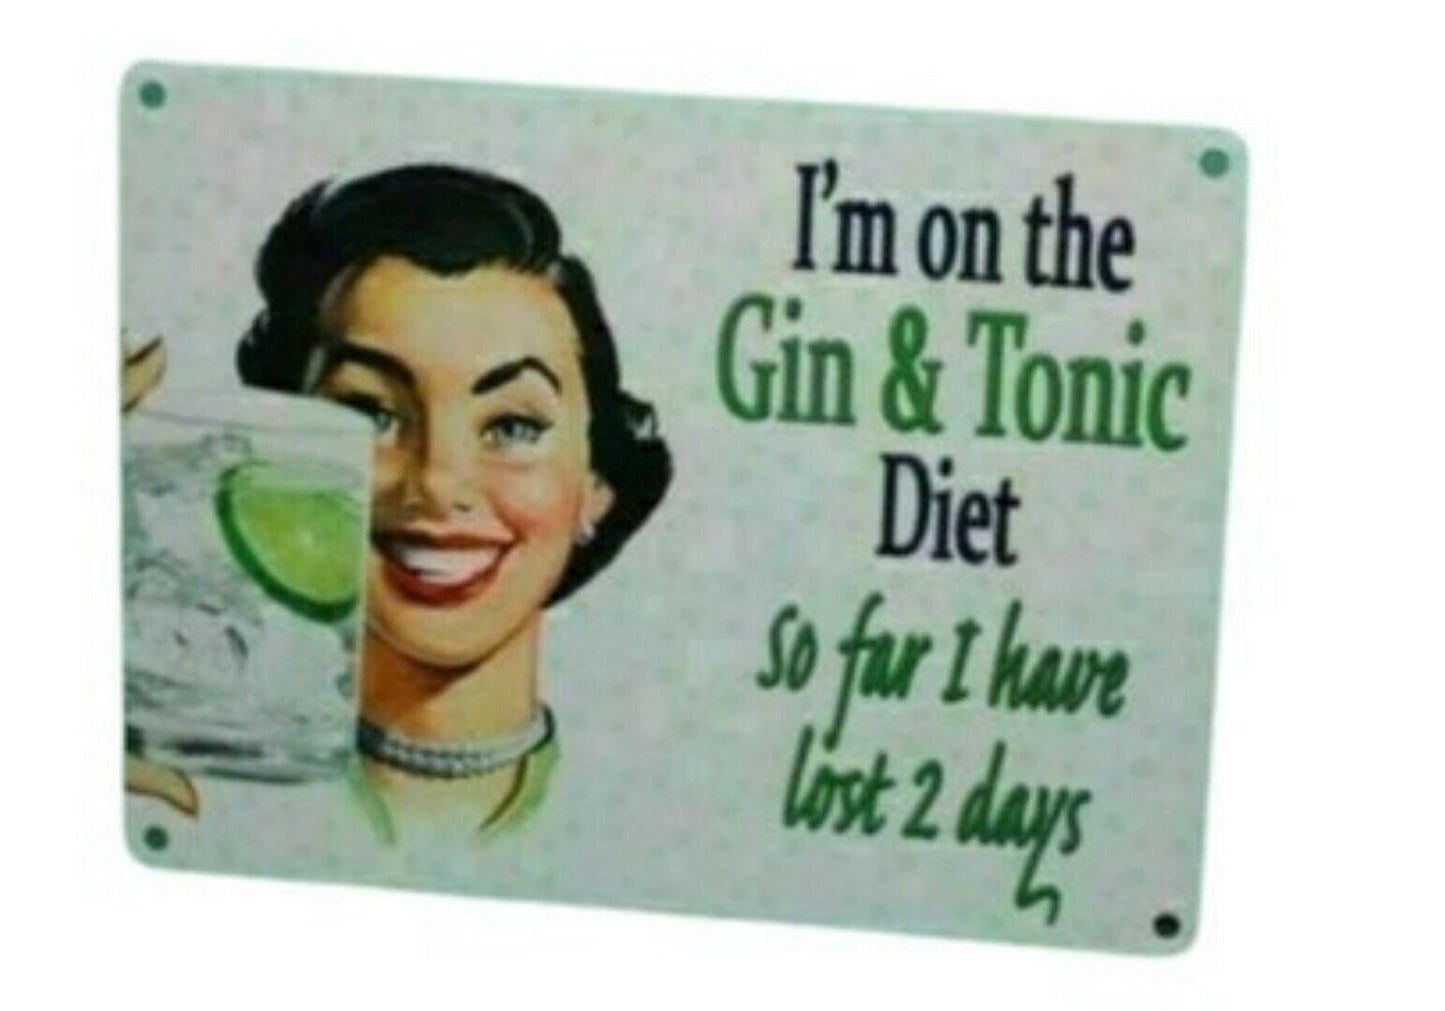 New Vintage Retro The Gin & Tonic Diet So Far I Have Lost 2 Days Plaque Sign